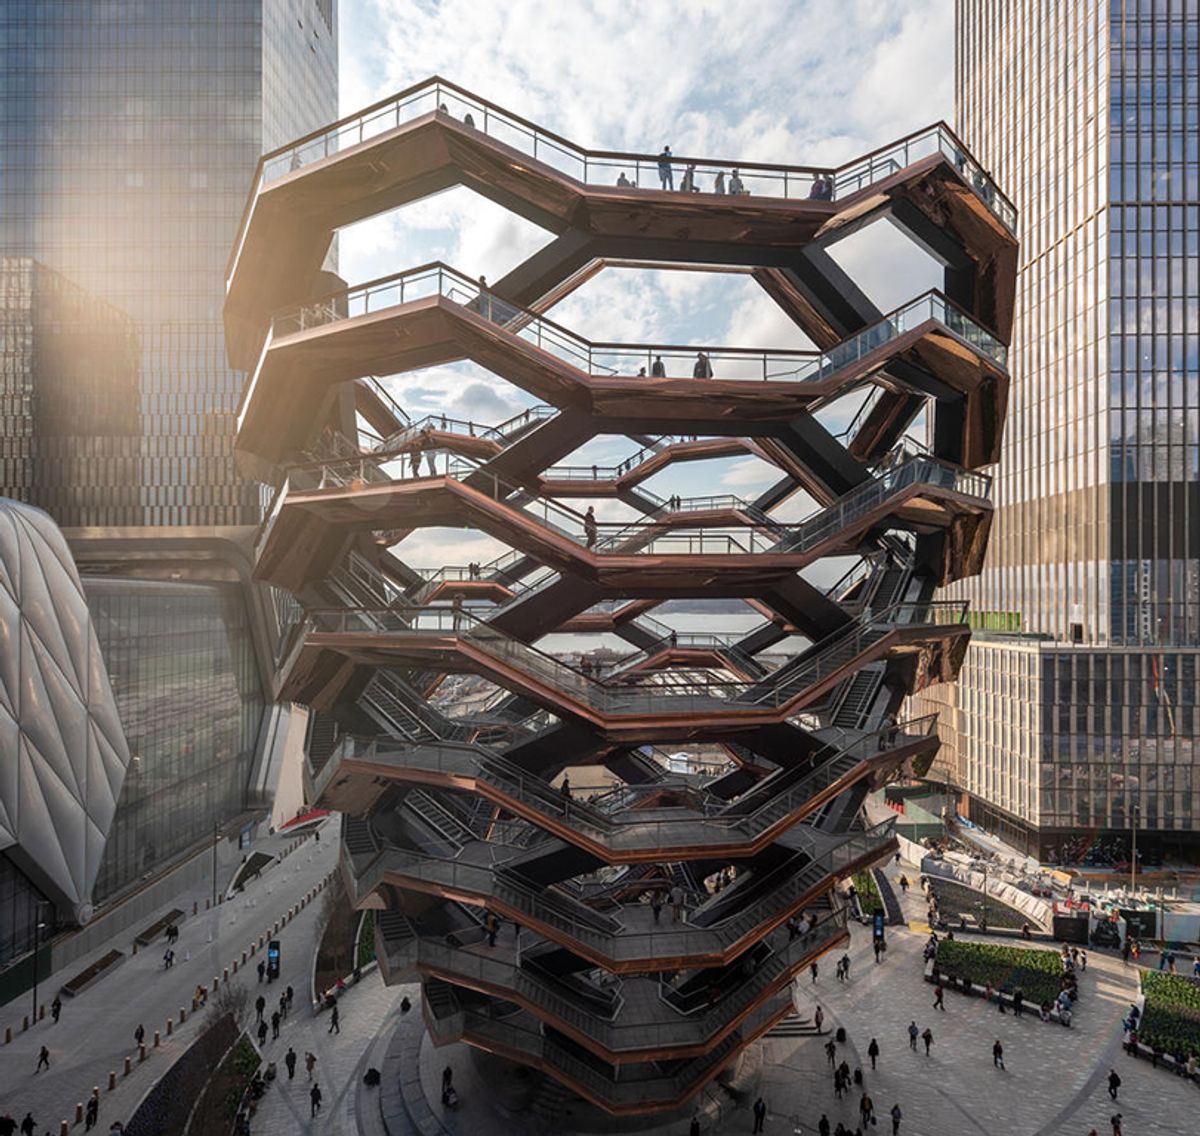 The climbable Vessel at the Hudson Yards development in New York Hudson Yards, New York